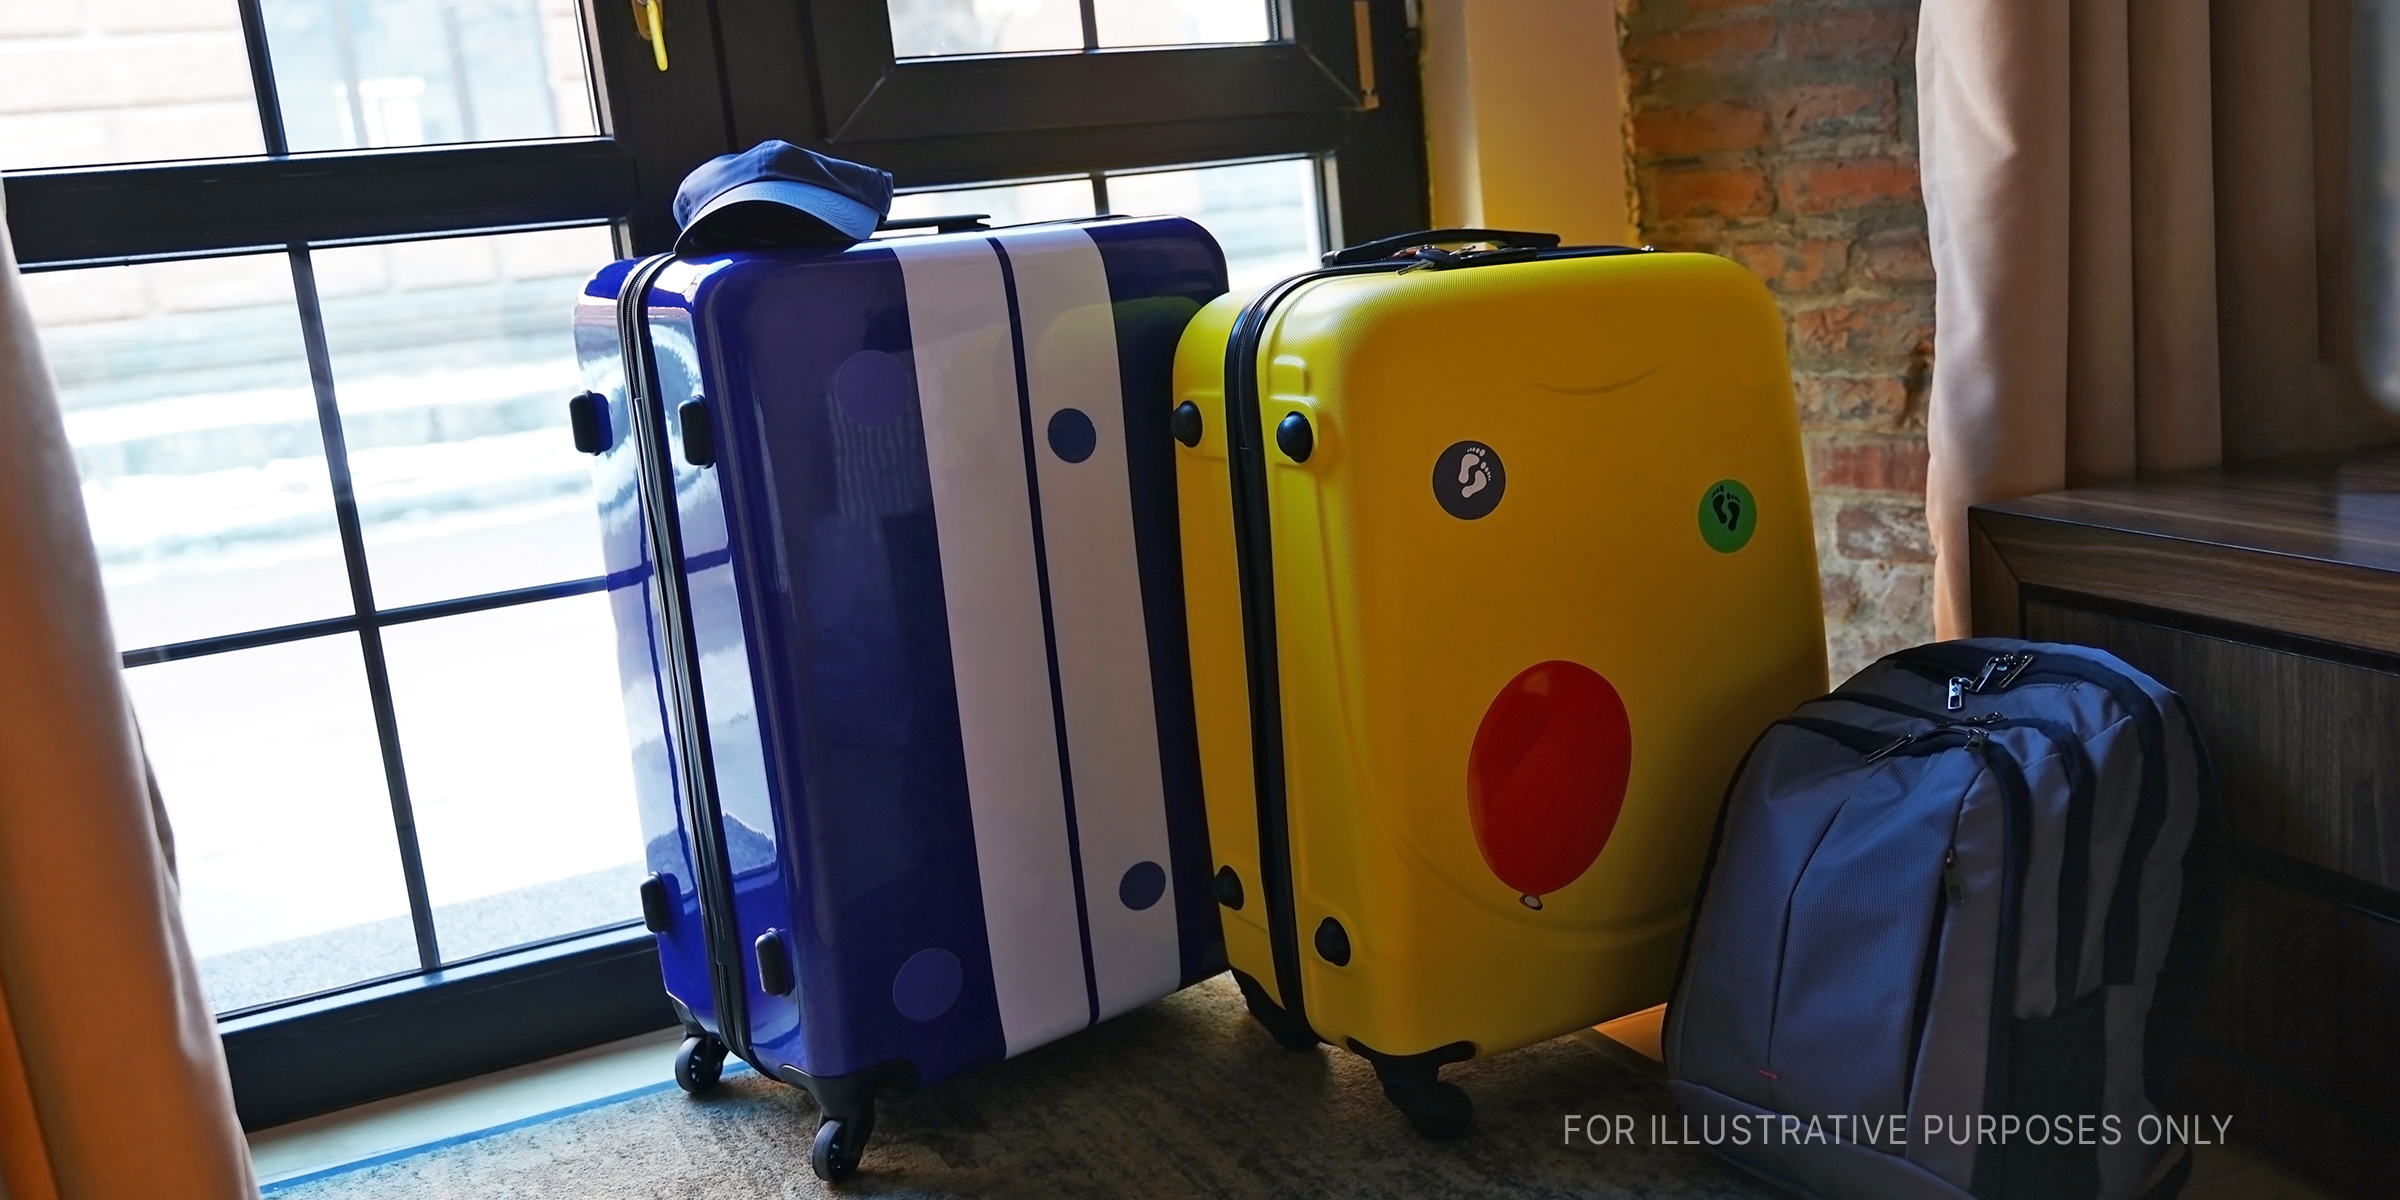 Three suitcases placed near entrance to house | Source: Shutterstock